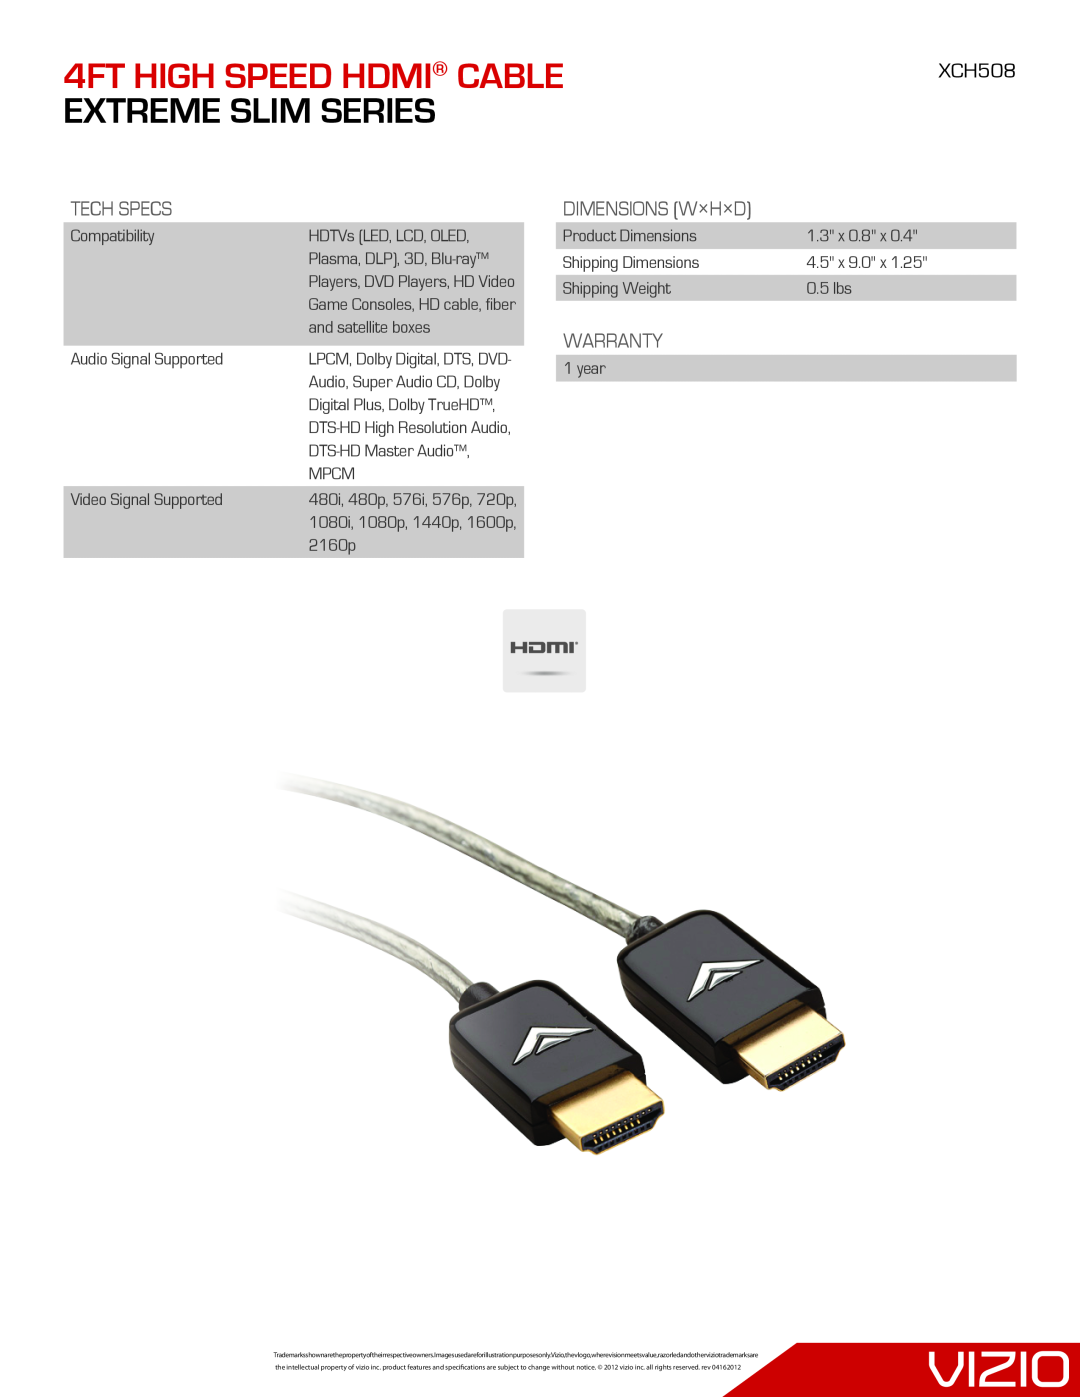 Vizio XCH508 manual 4FT HIGH SPEED HDMI CABLE EXTREME SLIM SERIES, Tech Specs, Dimensions W×H×D, Warranty 